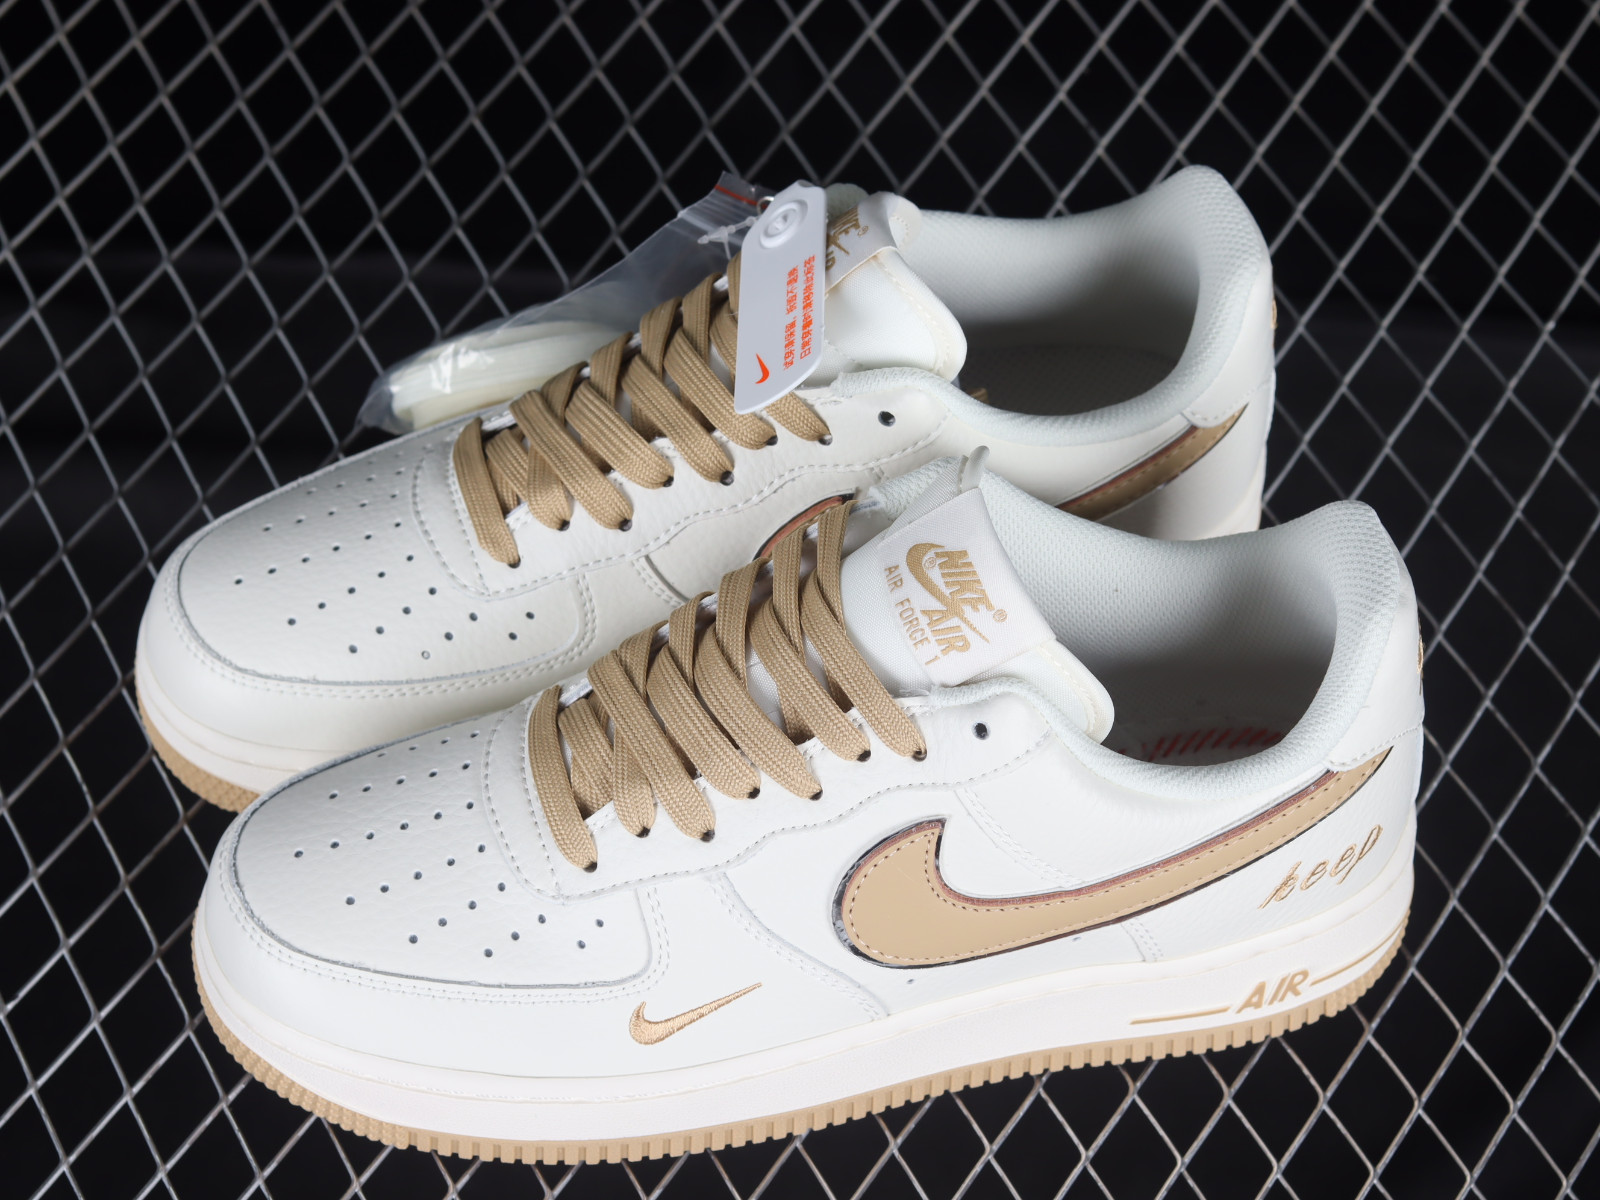 MultiscaleconsultingShops - LV x Nike Air Force 1 07 Low Cream